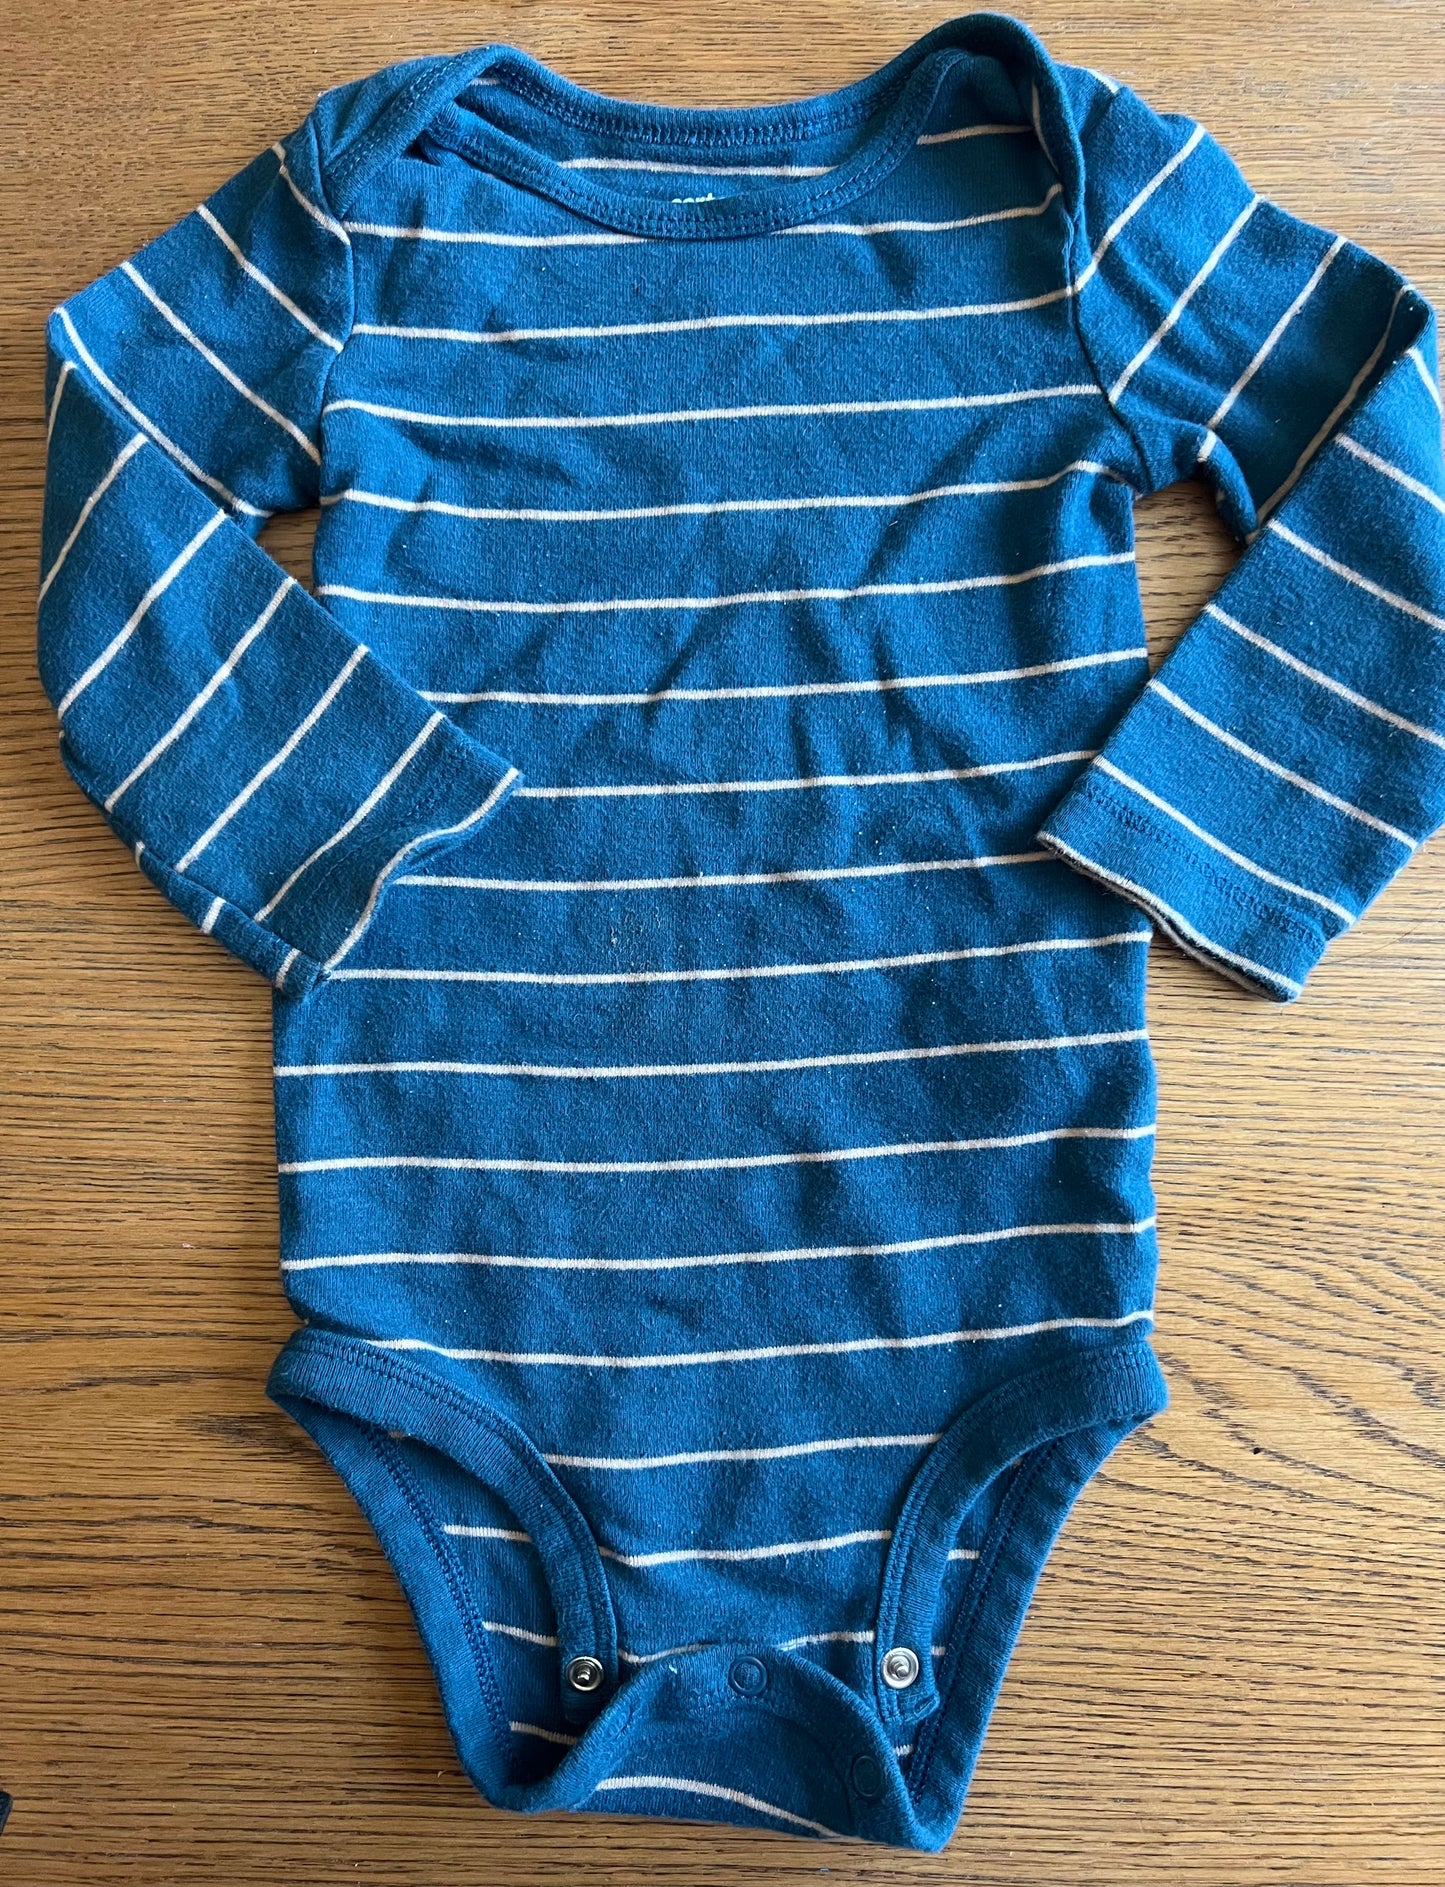 Carter’s 12 months striped long sleeve onesies